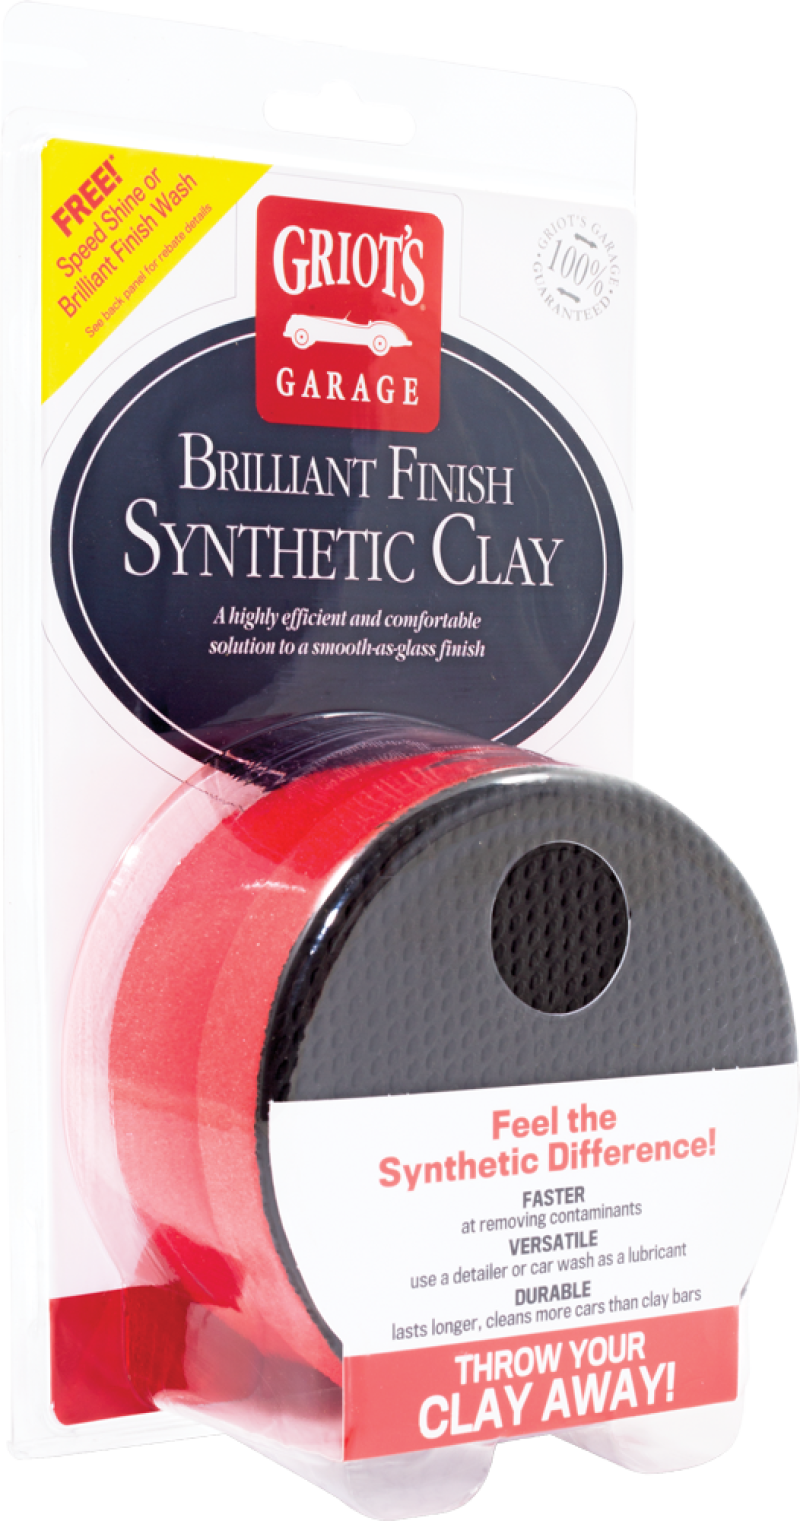 Griots Garage Brilliant Finish Synthetic Clay - 10691